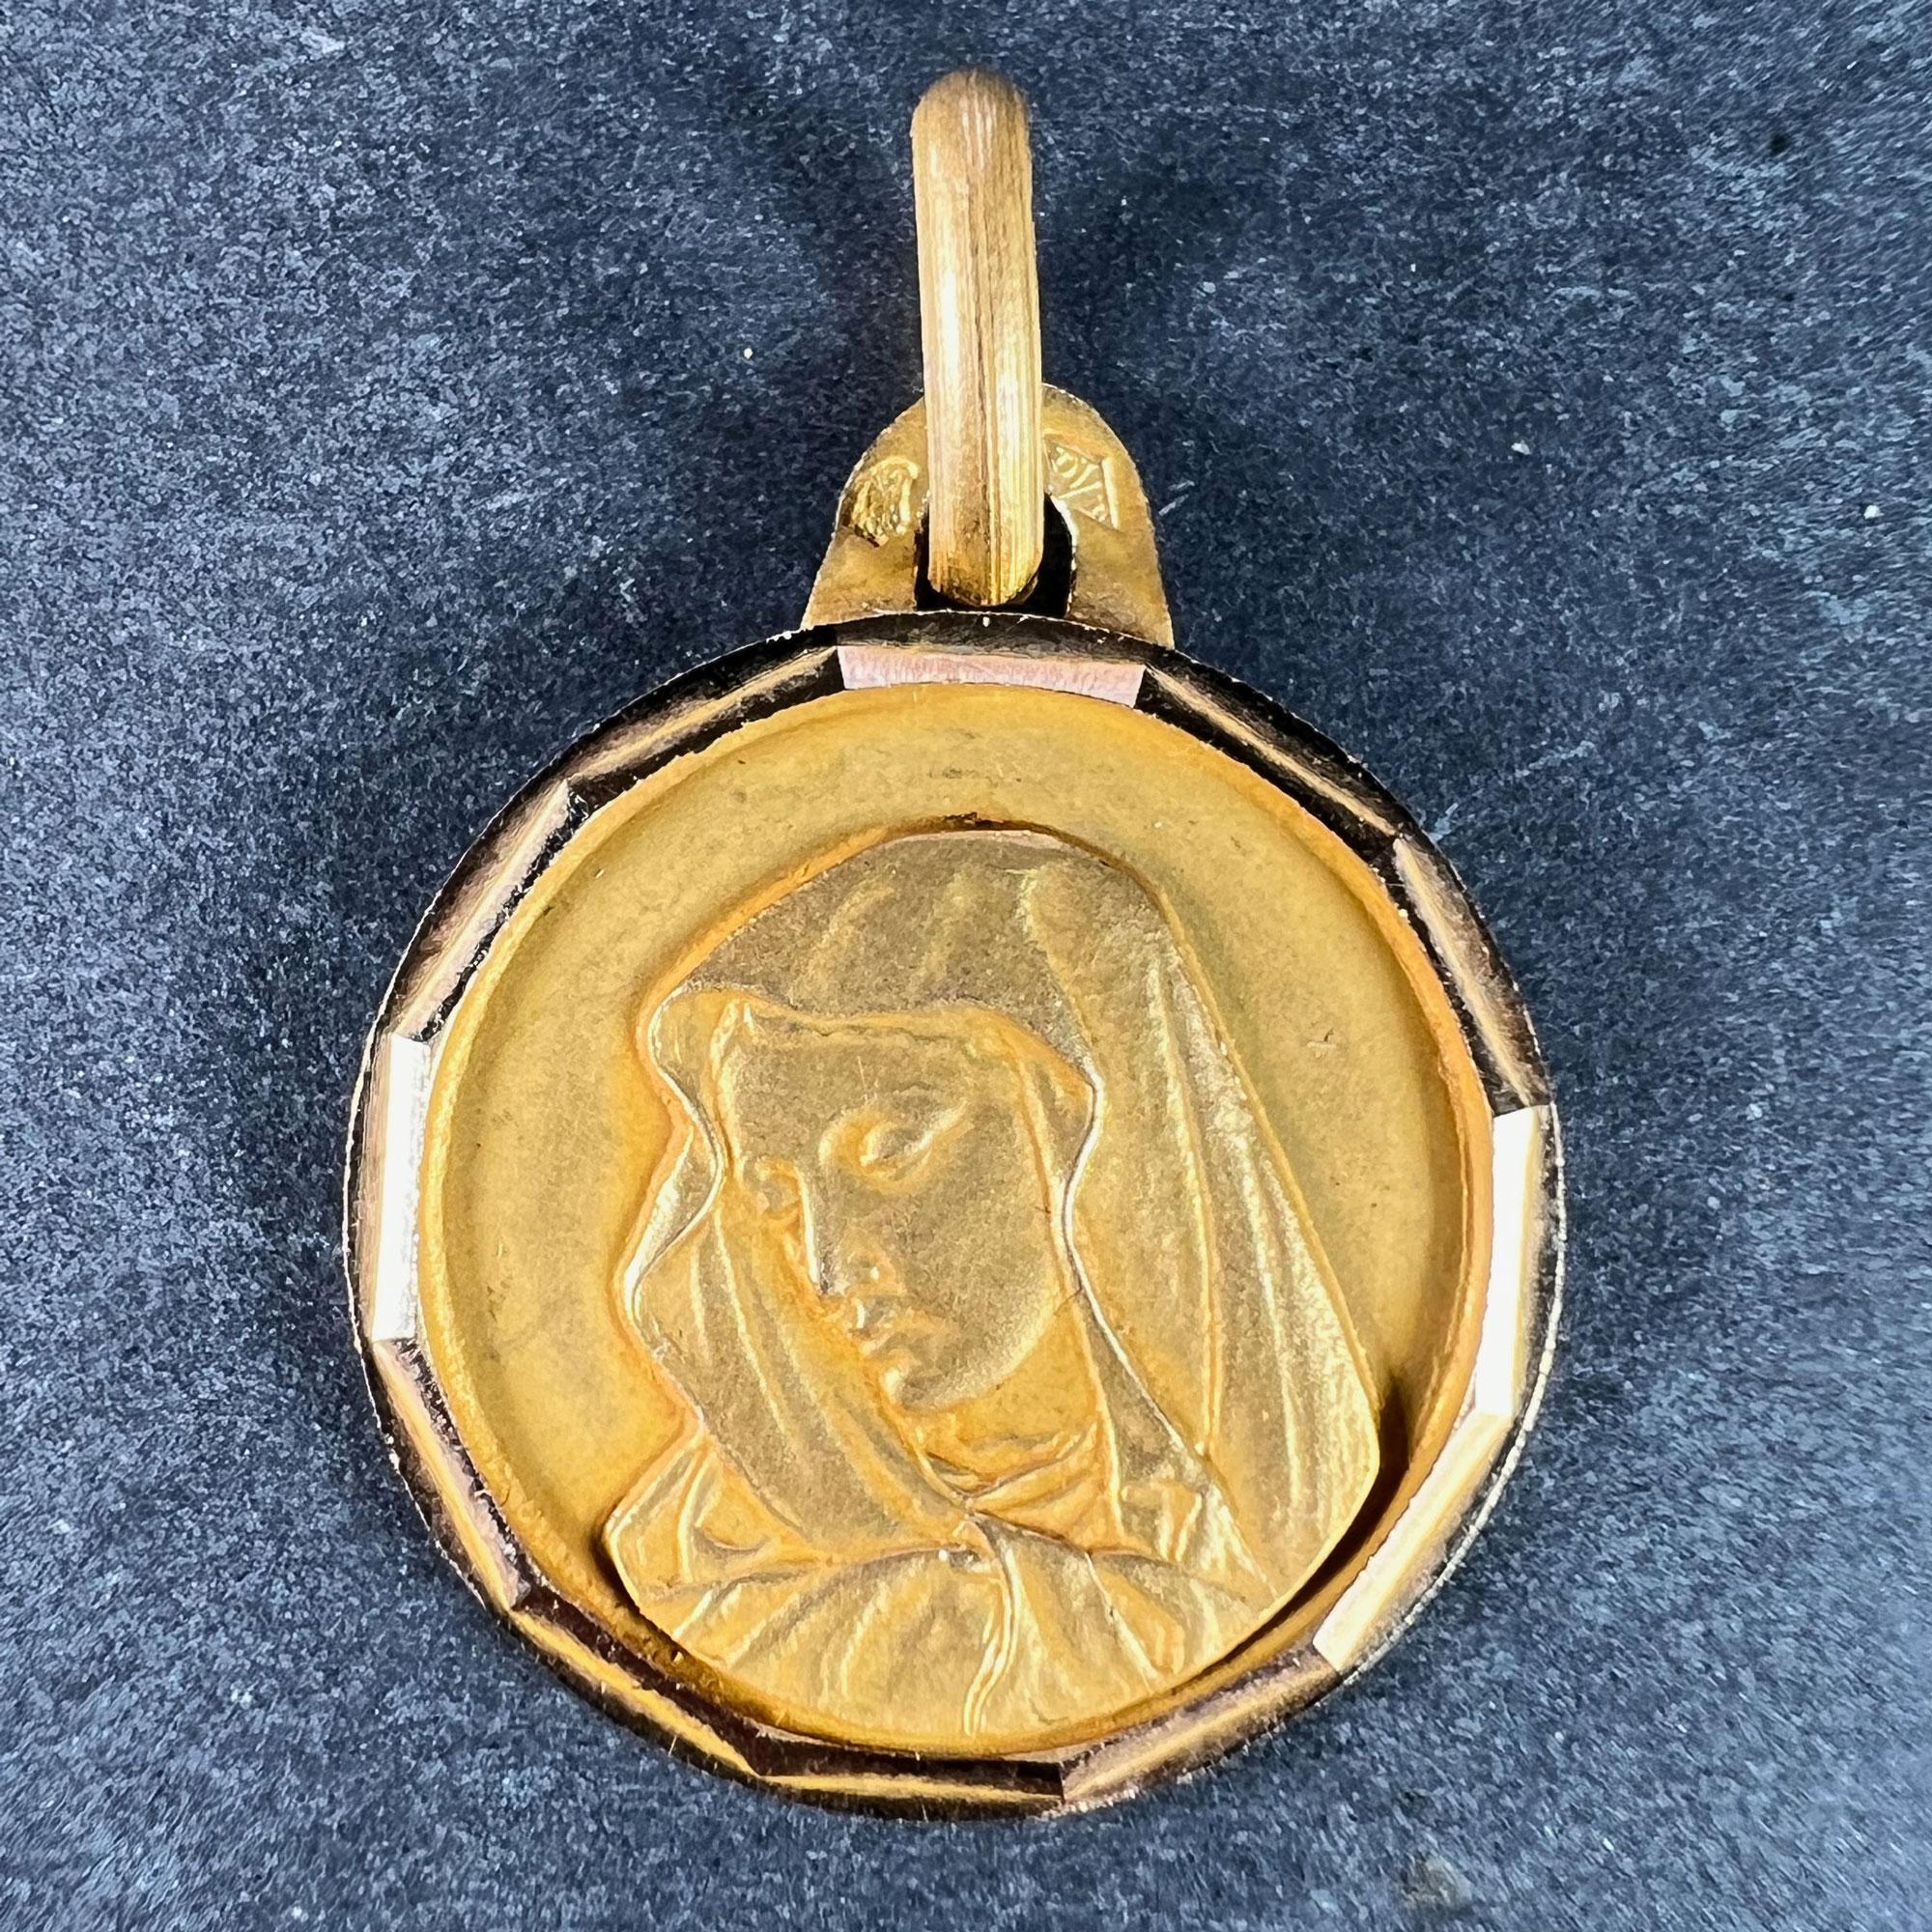 An 18 karat (18K) yellow gold charm pendant designed as a round medal with faceted frame depicting the Virgin Mary. Stamped with the eagle’s head for French manufacture and 18 karat gold, and an unknown maker’s mark.

Dimensions: 2 x 1.7 x 0.1 cm